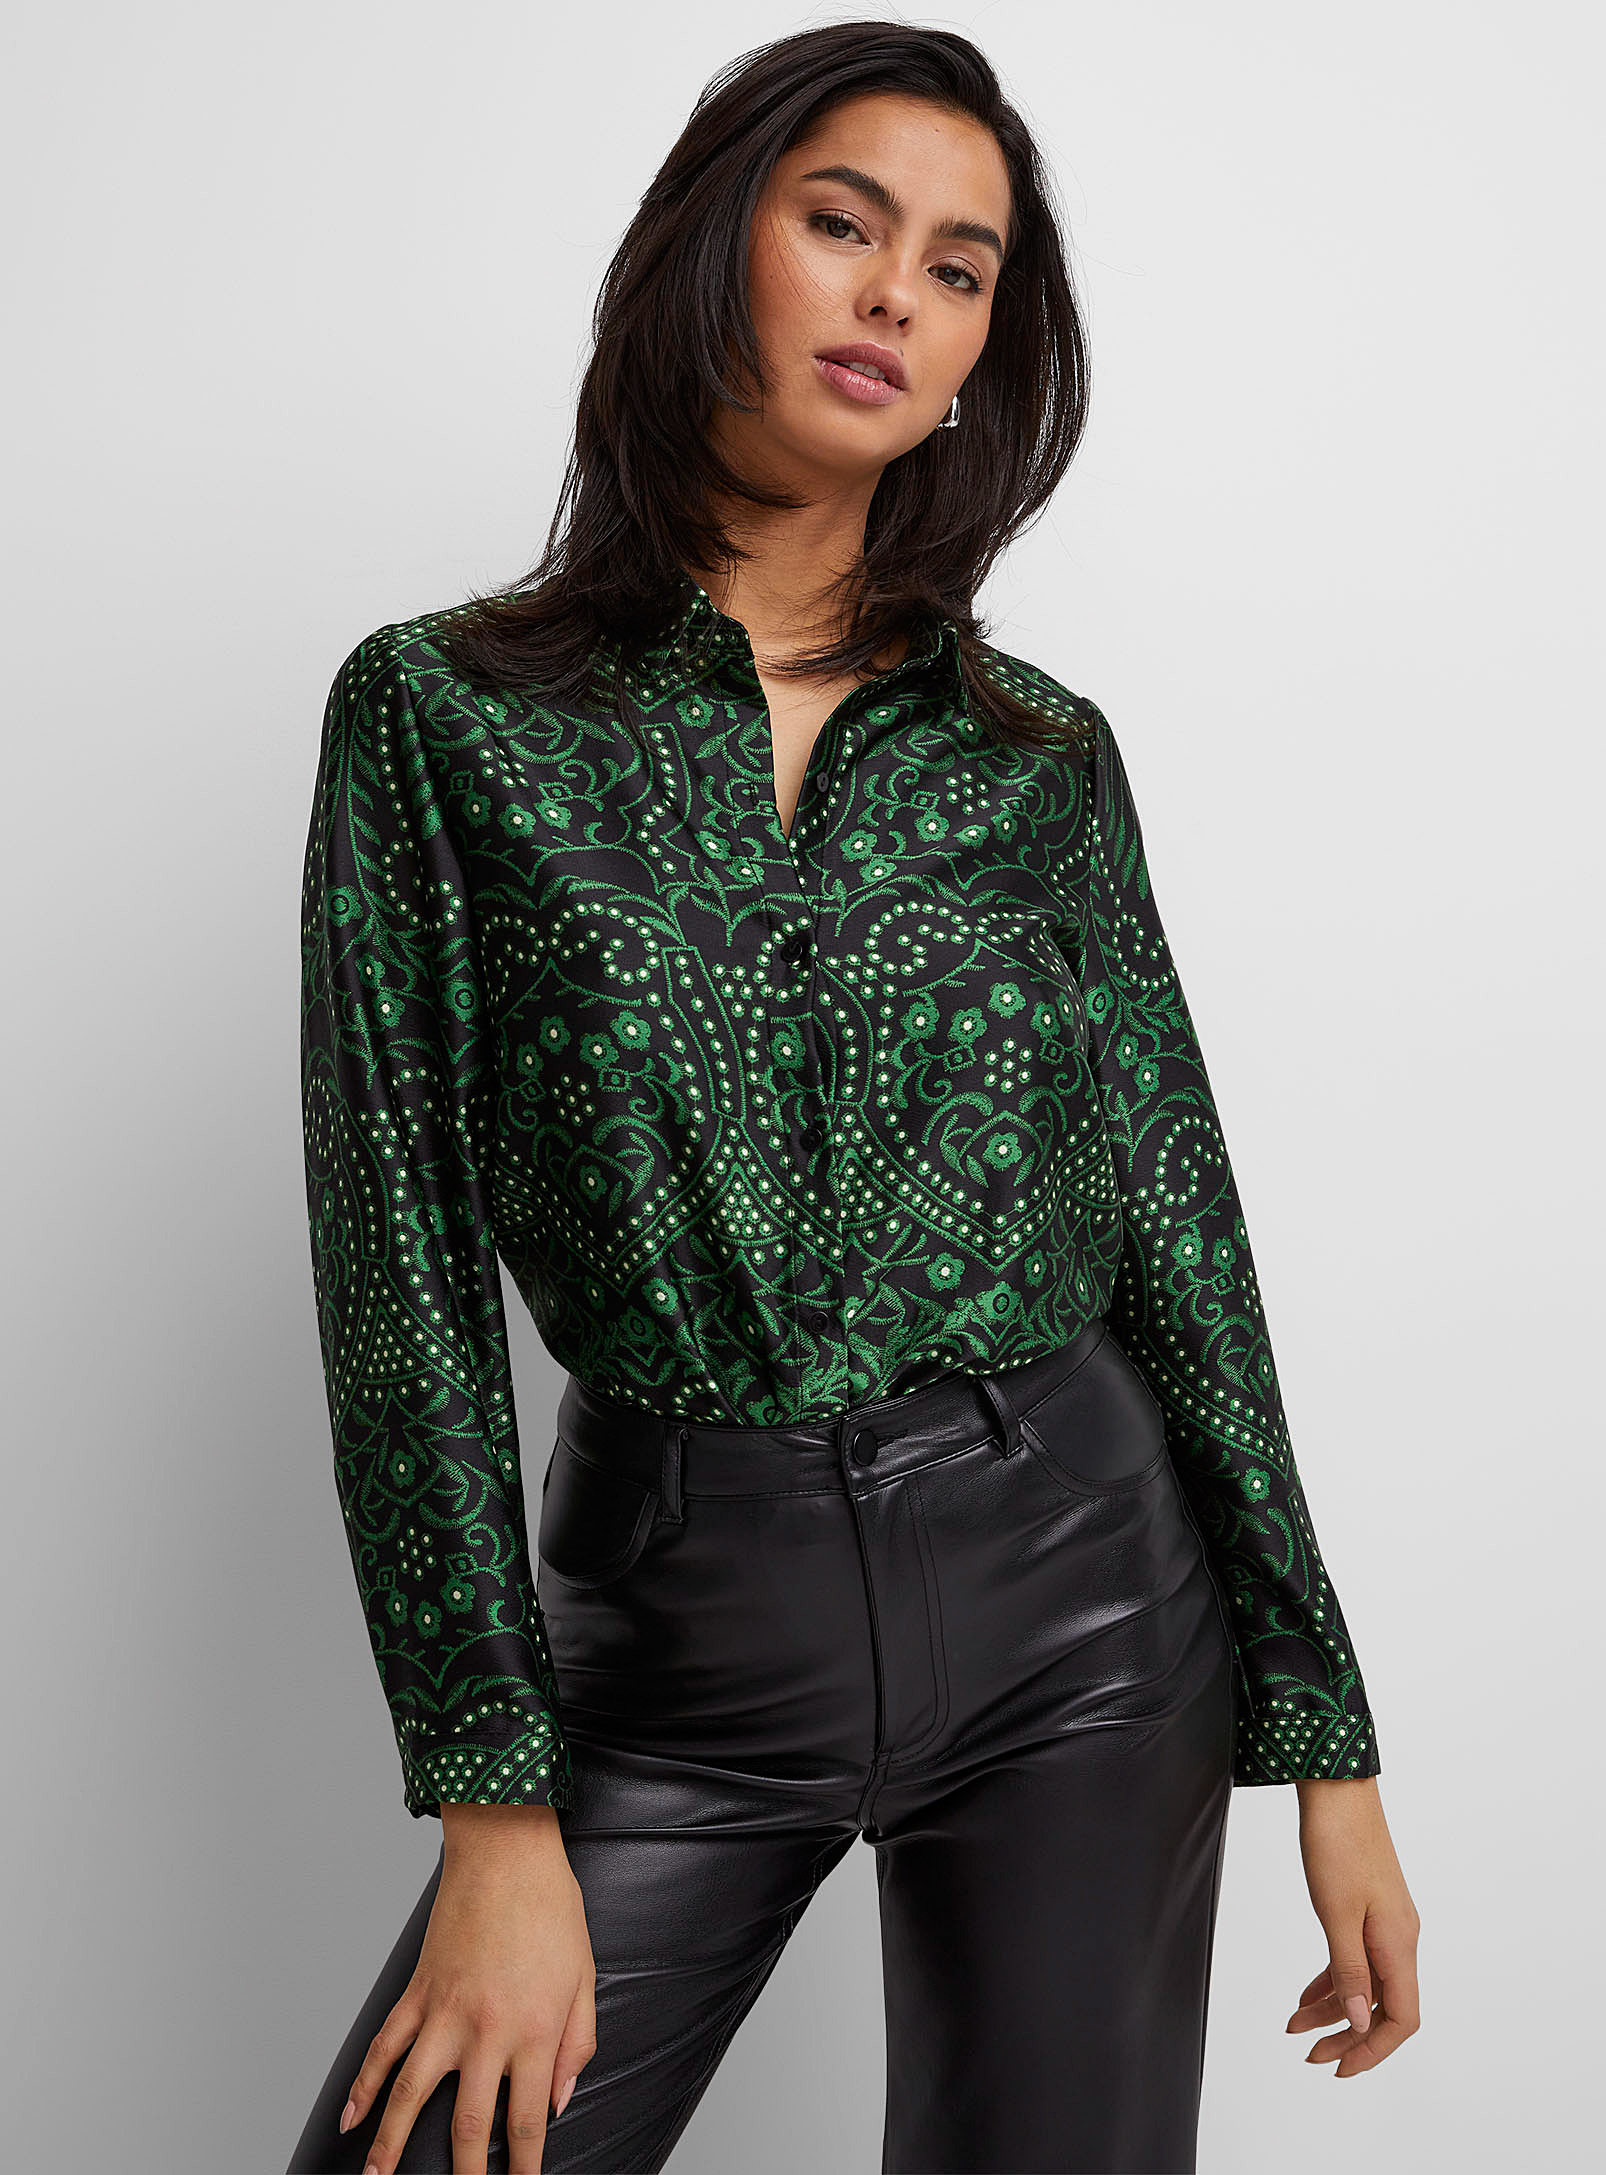 Icone Satin Printed Shirt In Patterned Green